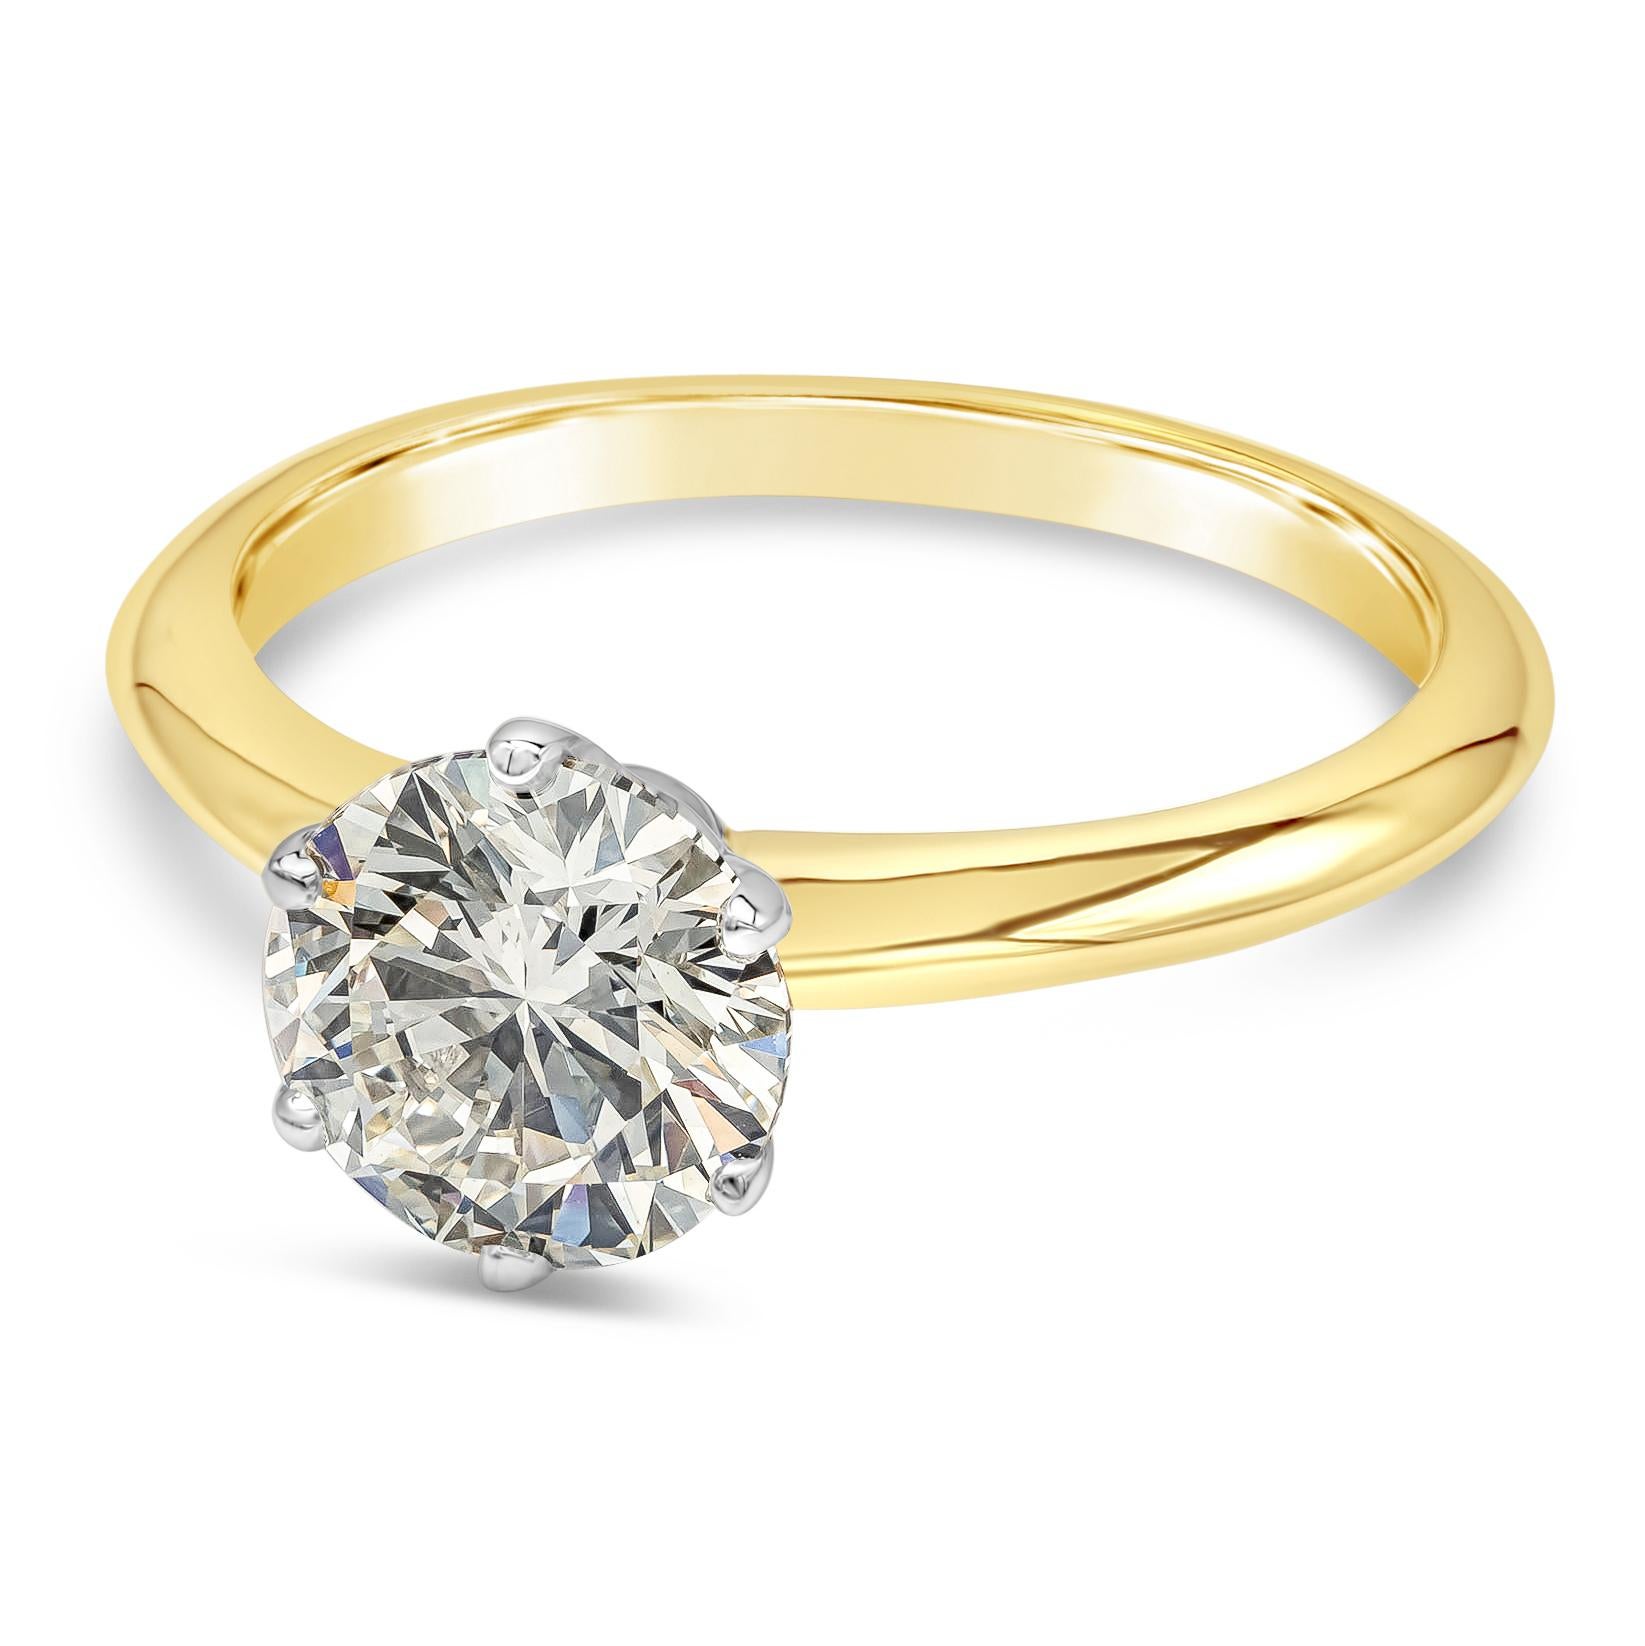 A timeless engagement ring style showcasing a 1.55 carat round brilliant diamond, set in a six-prong, knife edge setting made in Platinum & 18k gold. GIA certified the diamond as L color, VS2 clarity. Size 6.5 US (Sizable upon request).

Style